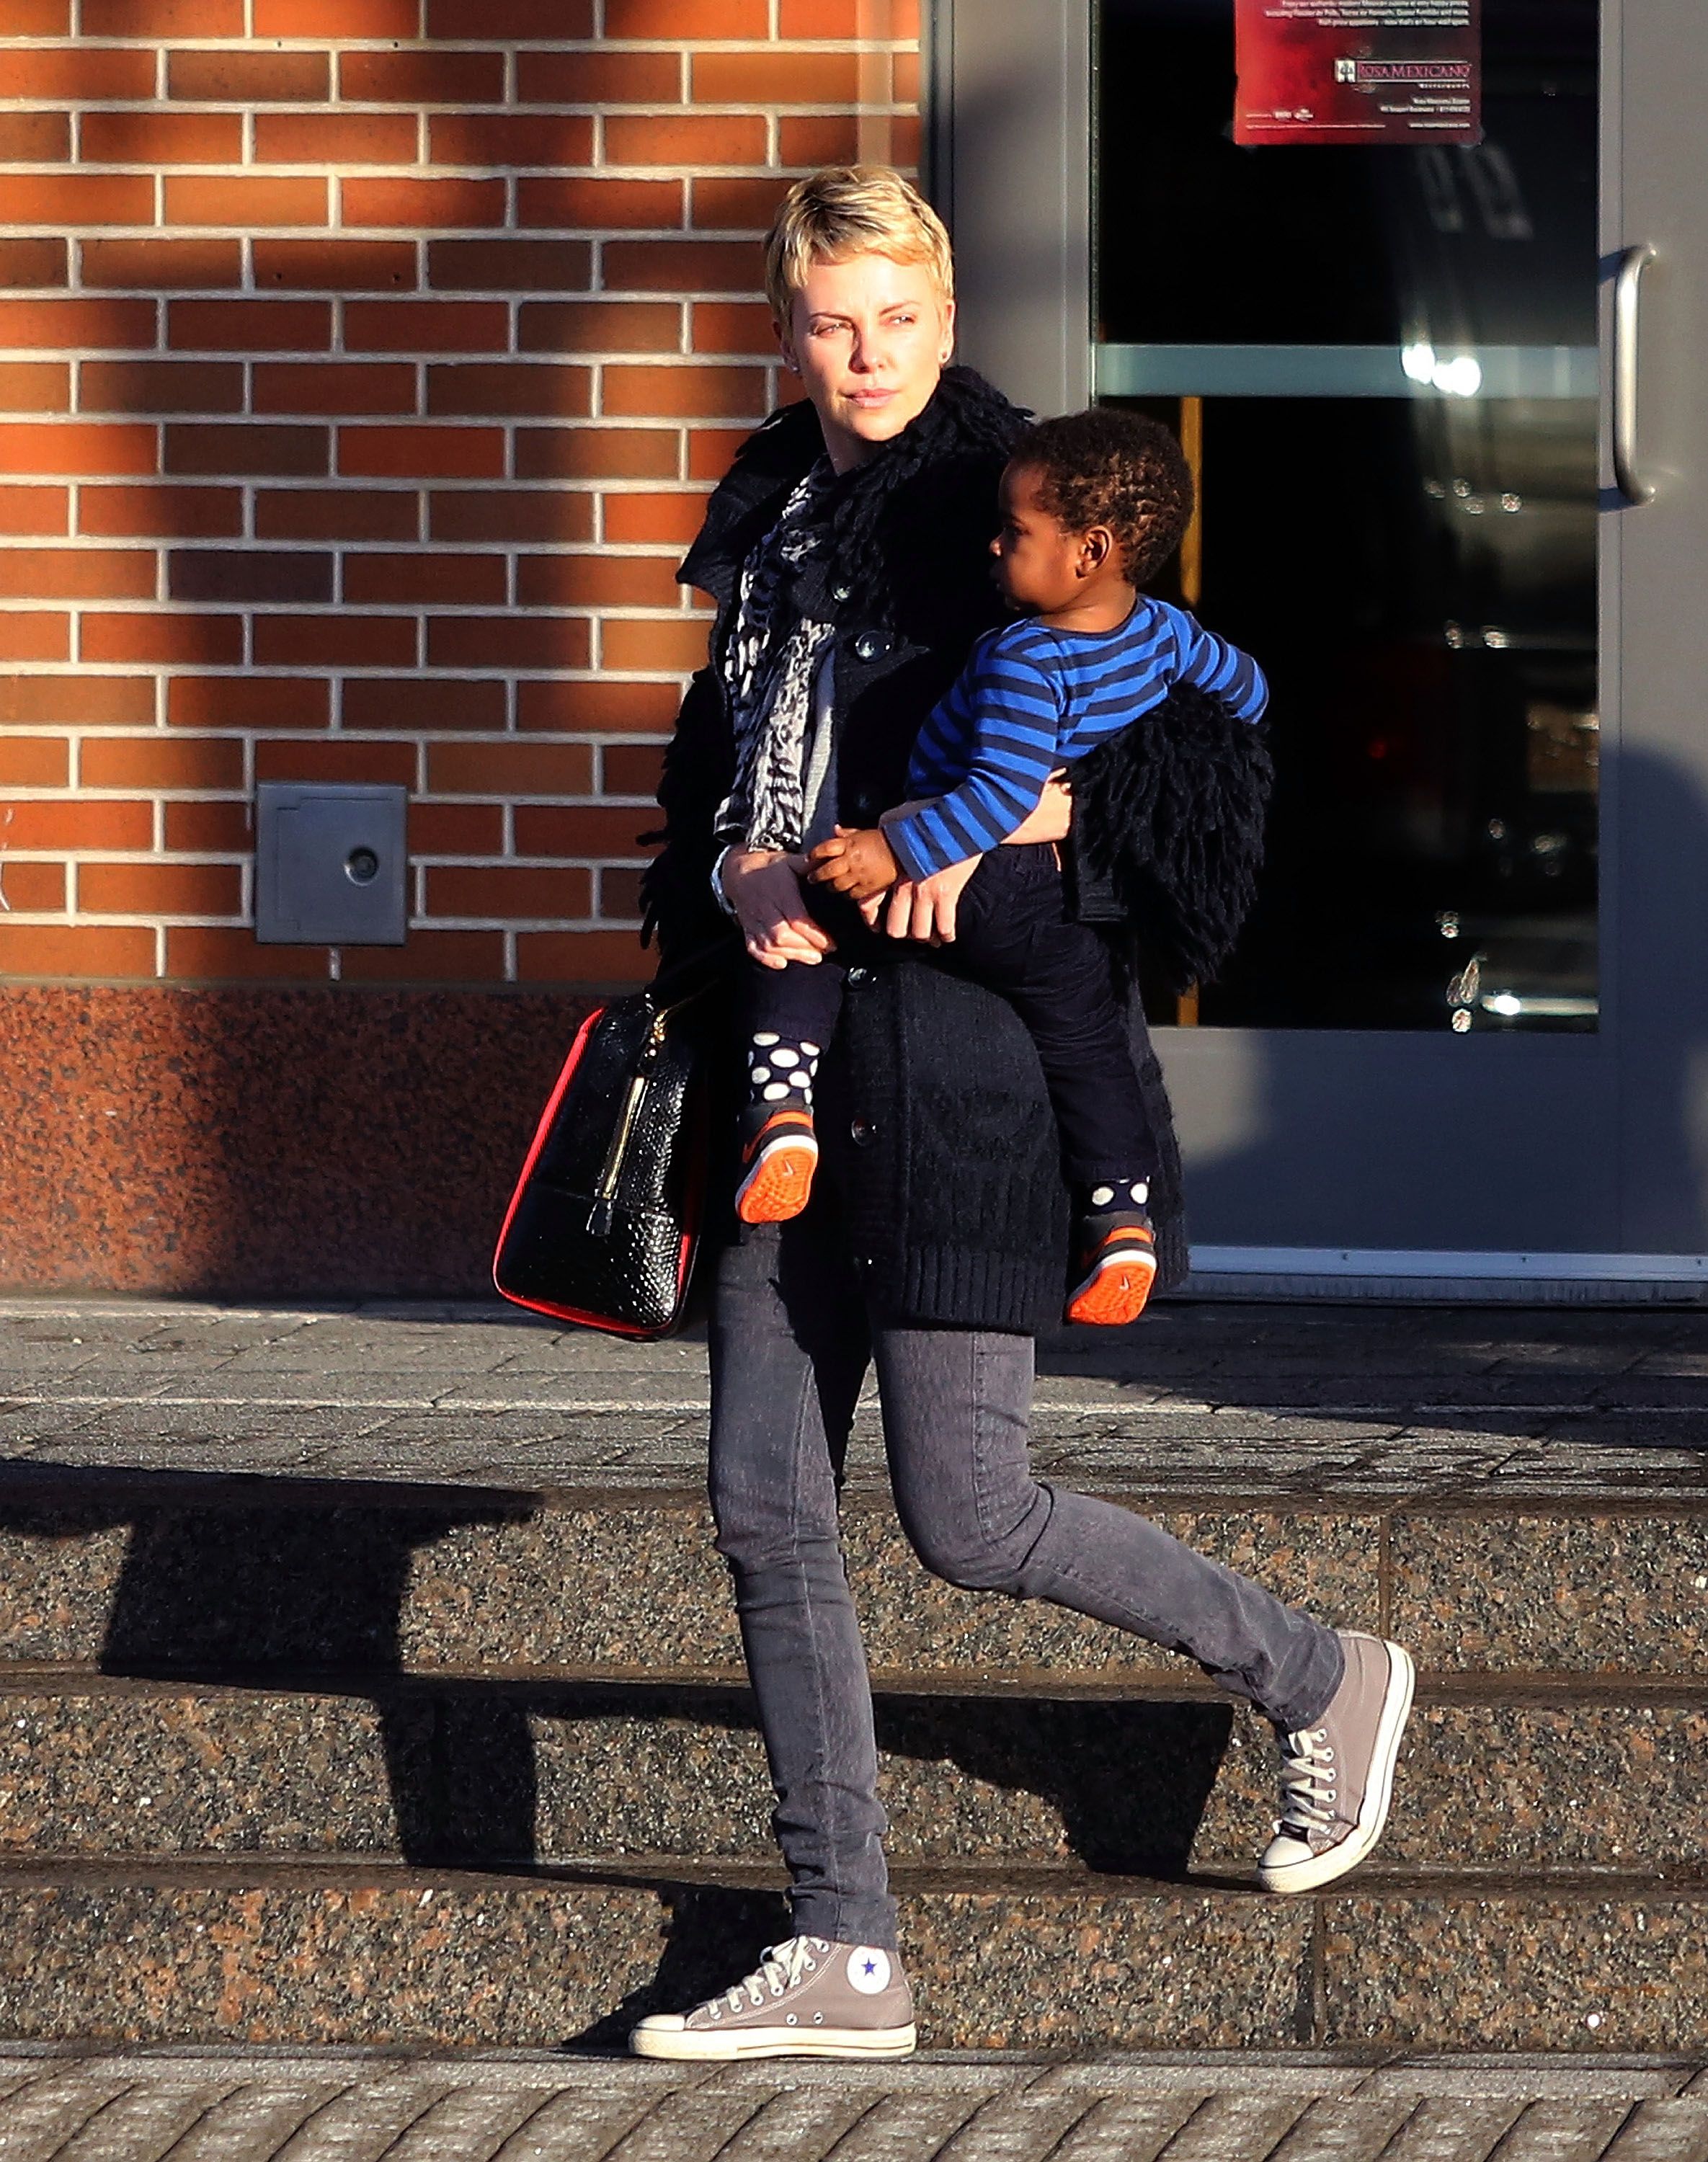 Charlize Theron with Jackson Theron on March 24, 2013, in Boston, Massachusetts | Photo: Stickman/Bauer-Griffin/GC Images